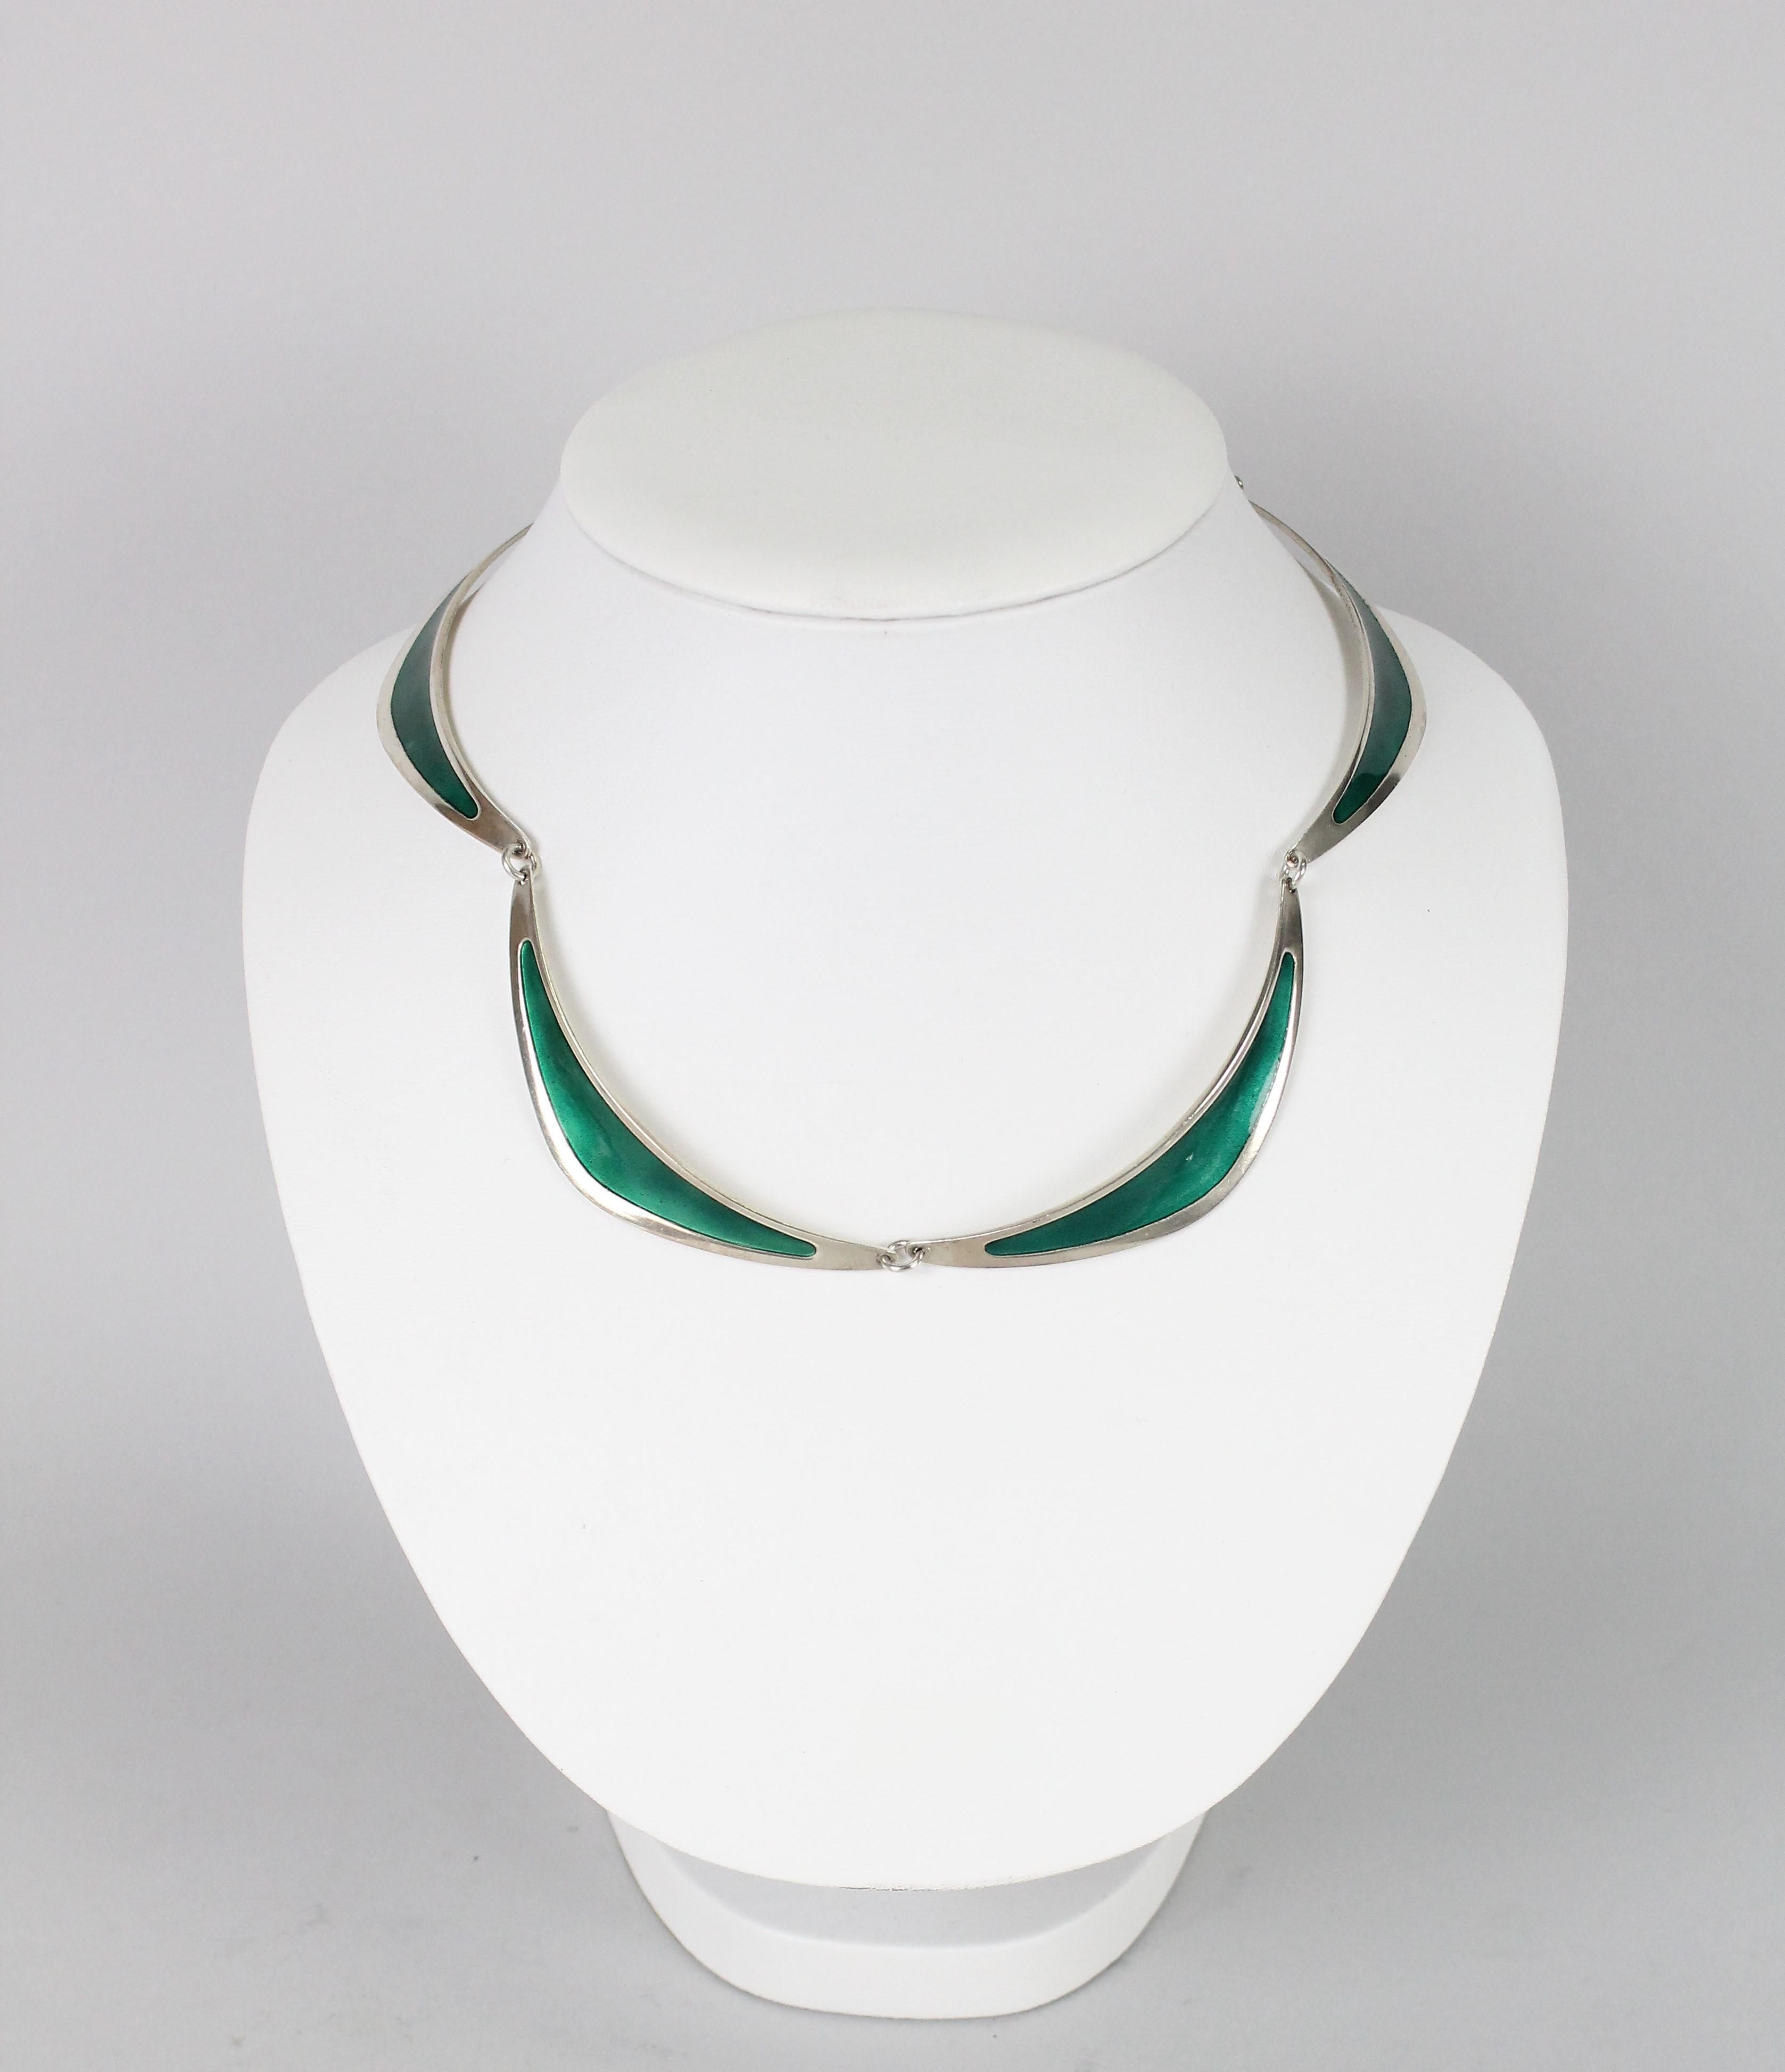 Very nice necklace in sterling silver and green enamel.
Made in Stockholm, Sweden 1958 by Atelier Borgila.
Very nice vintage condition. No issues! 

Atelier Borgila was founded by designer Erik Fleming (1894-1954) in the early 1920s.
In 1933 Borgila